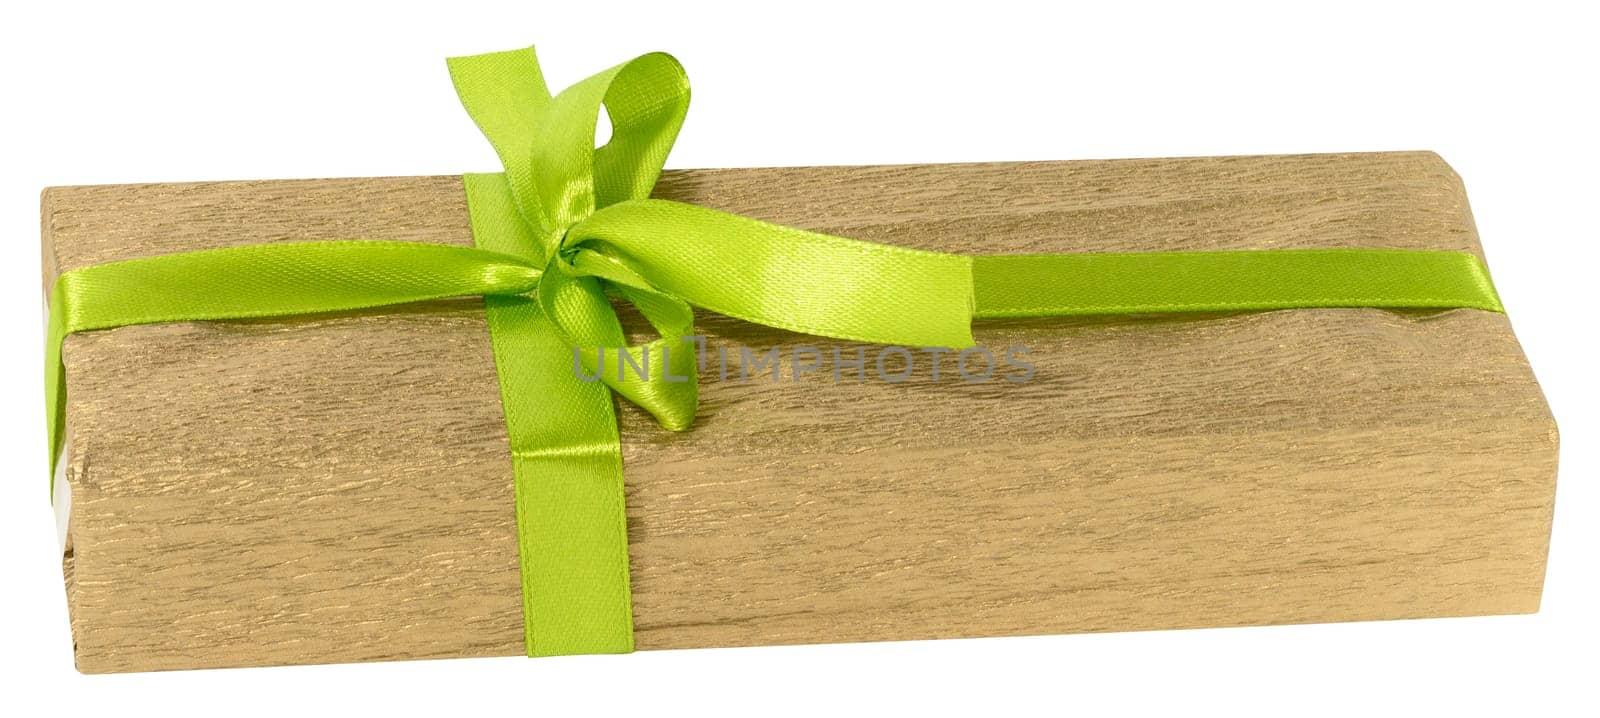 Box is wrapped in yellow gift wrapping and green ribbon on a white isolated background